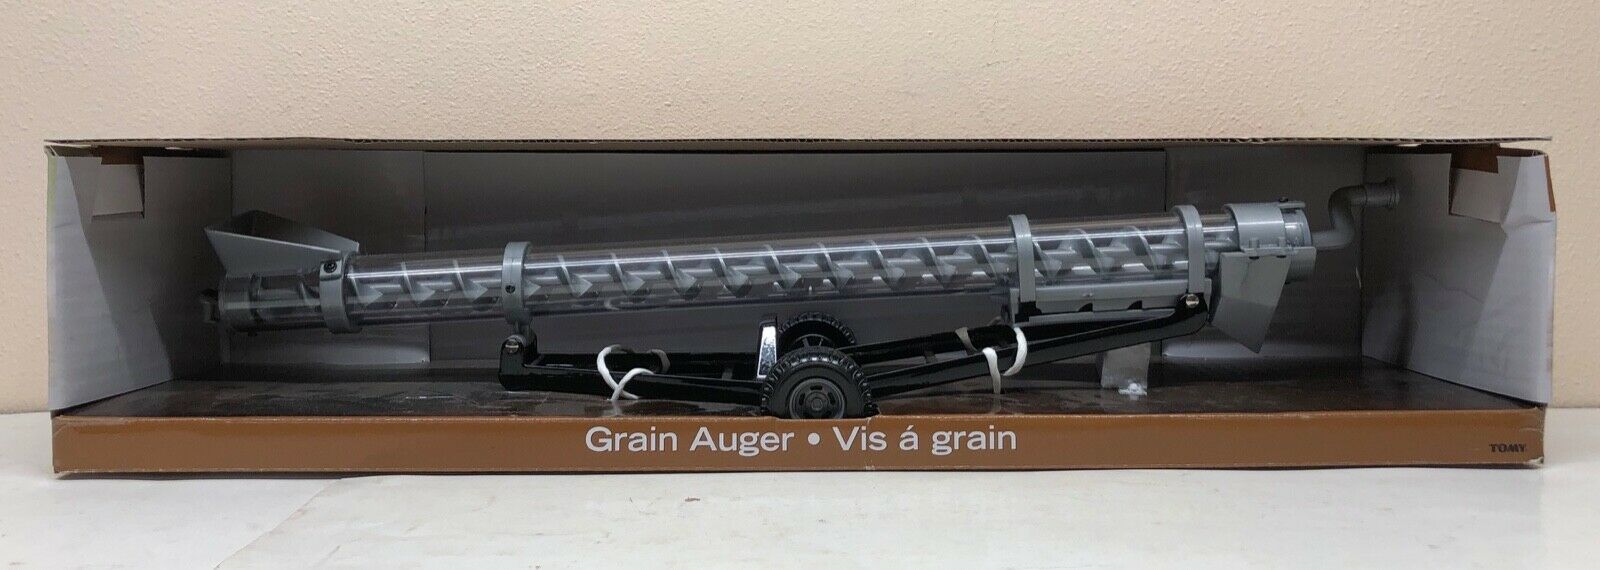 1/16 Grain Auger with Crank Tractor Implement DieCast New in Box by ERTL